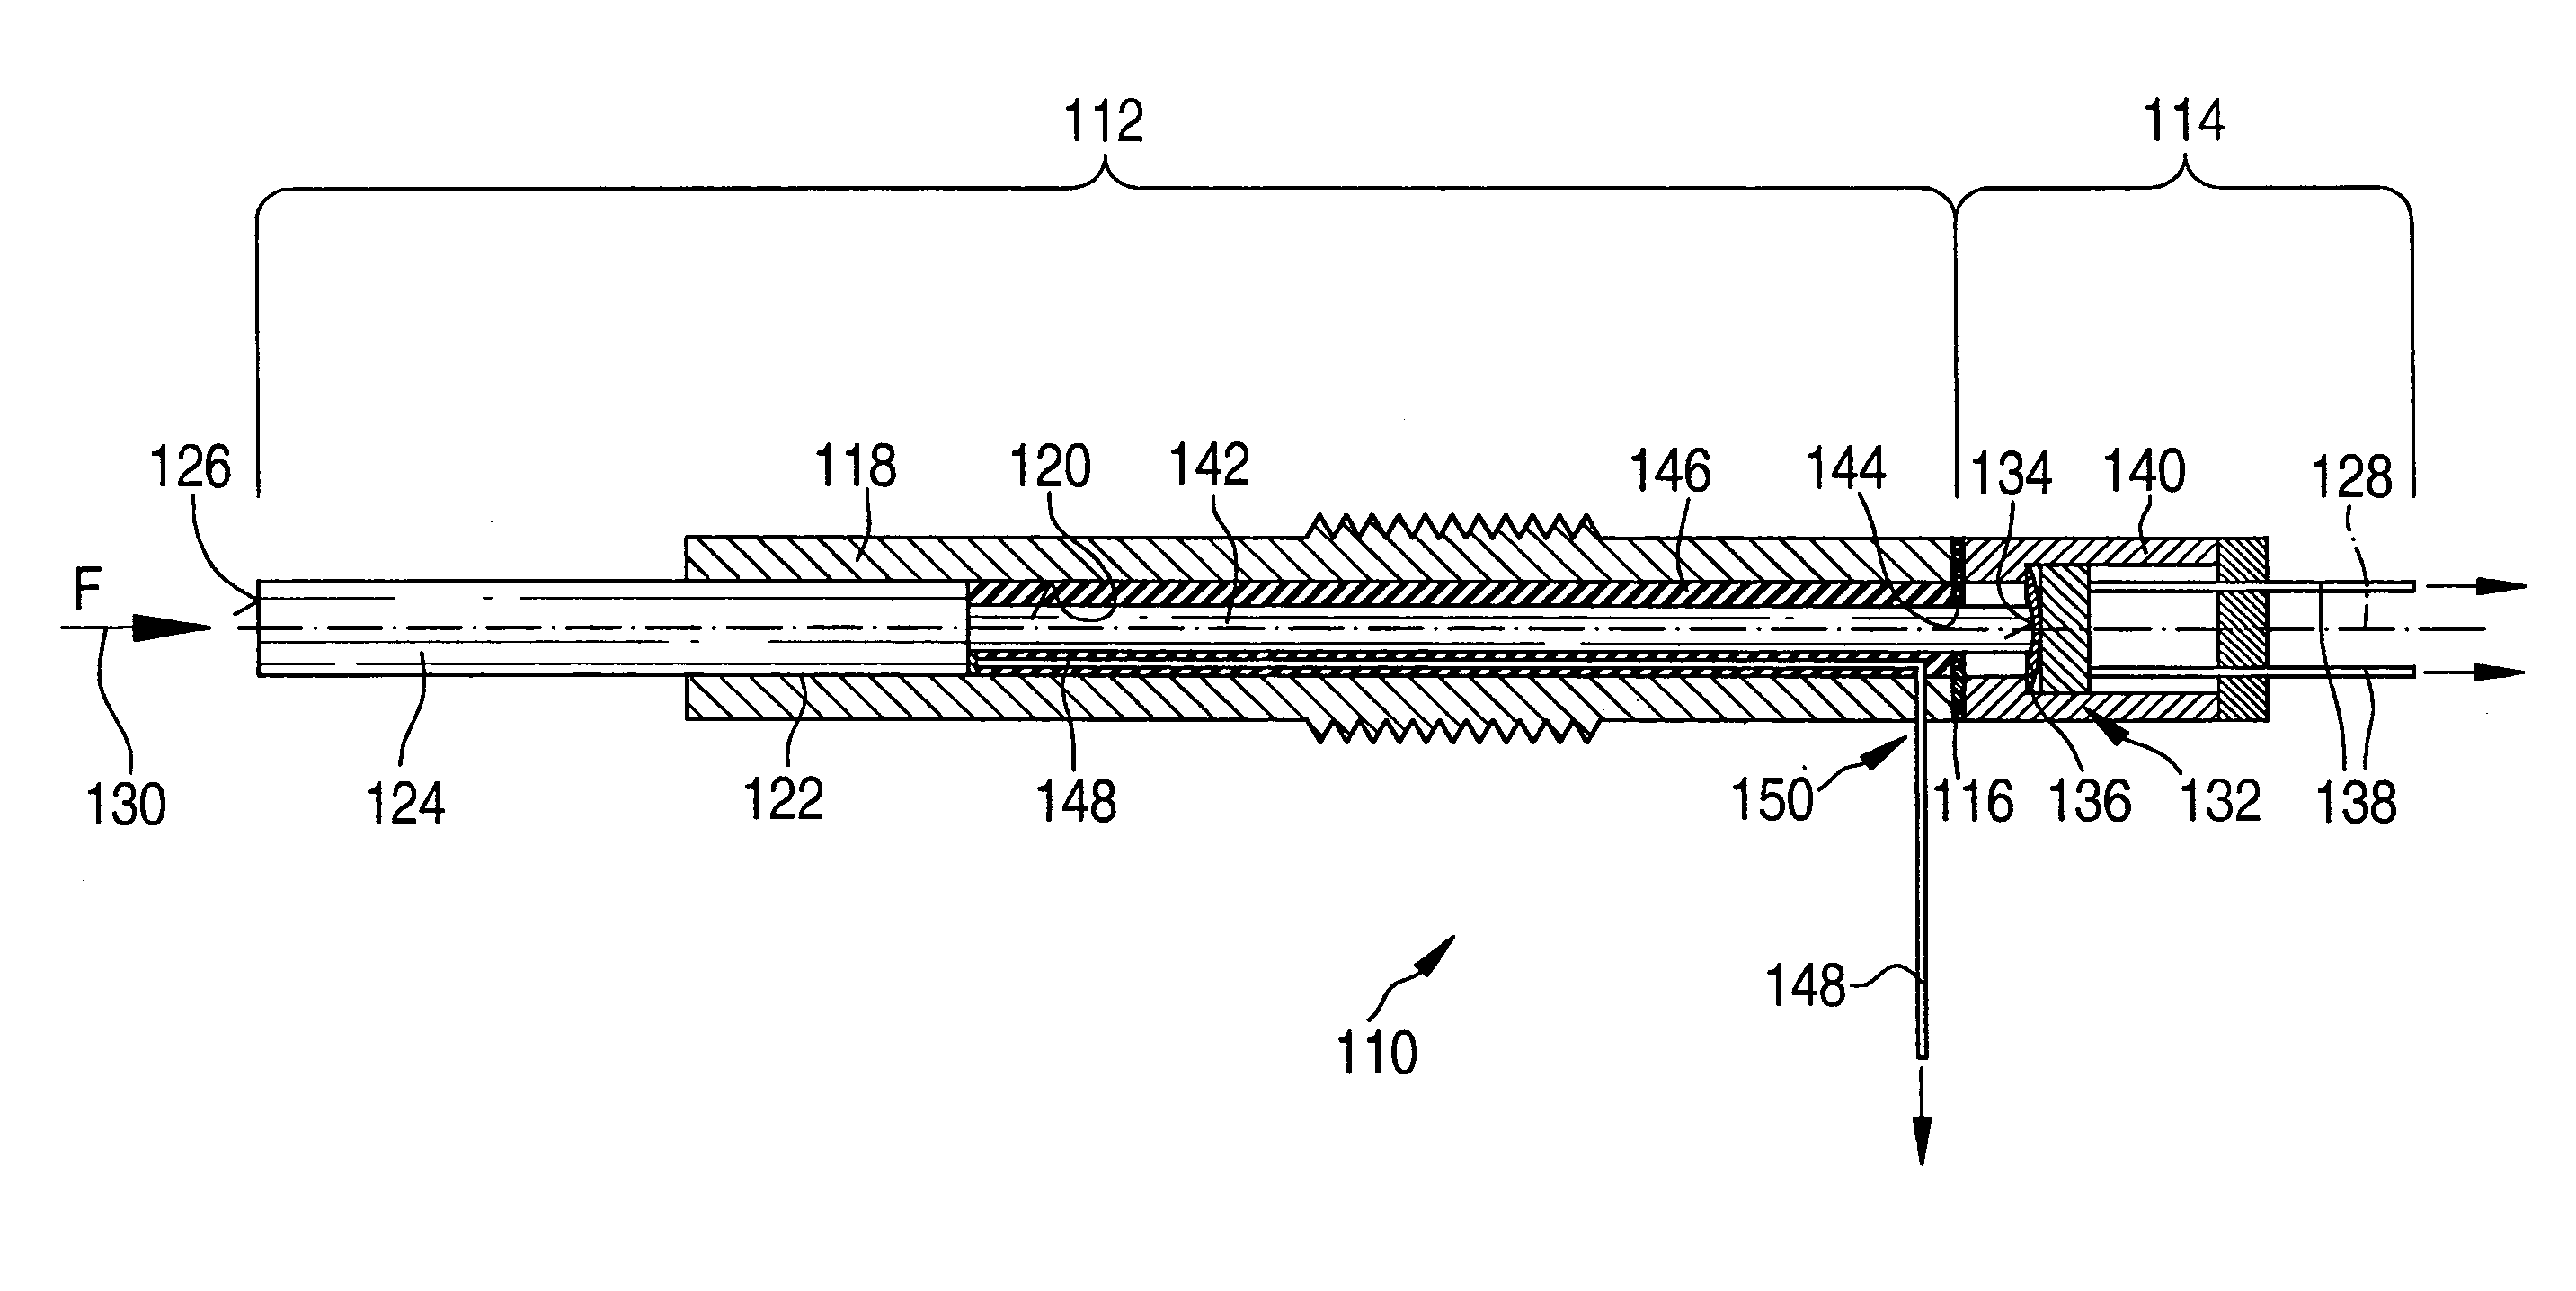 Sheathed Element Glow Plug Having an Integrated Pressure Measuring Element